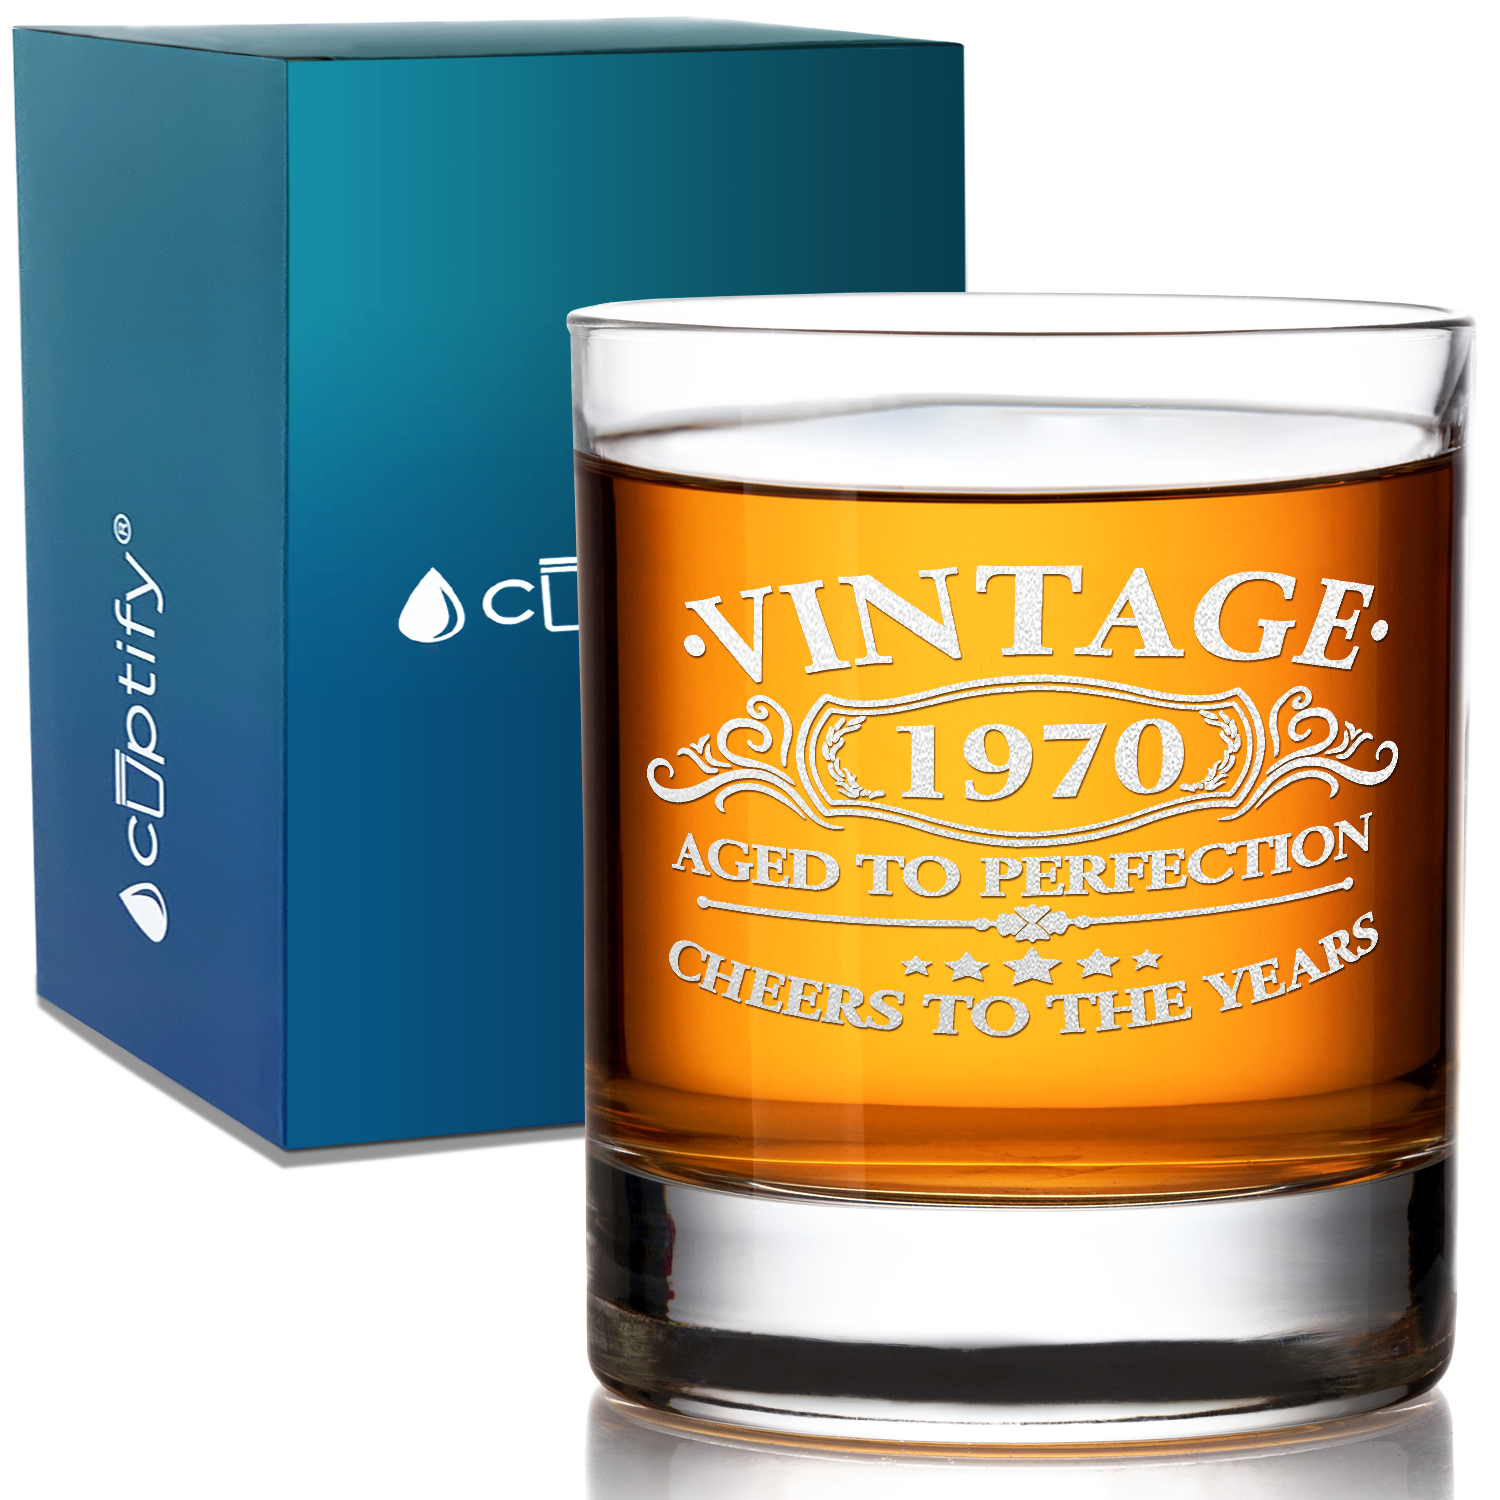 Vintage Aged To Perfection Cheers To 51 Years 1970 Laser Engraved on 10.25oz Old Fashion Glass